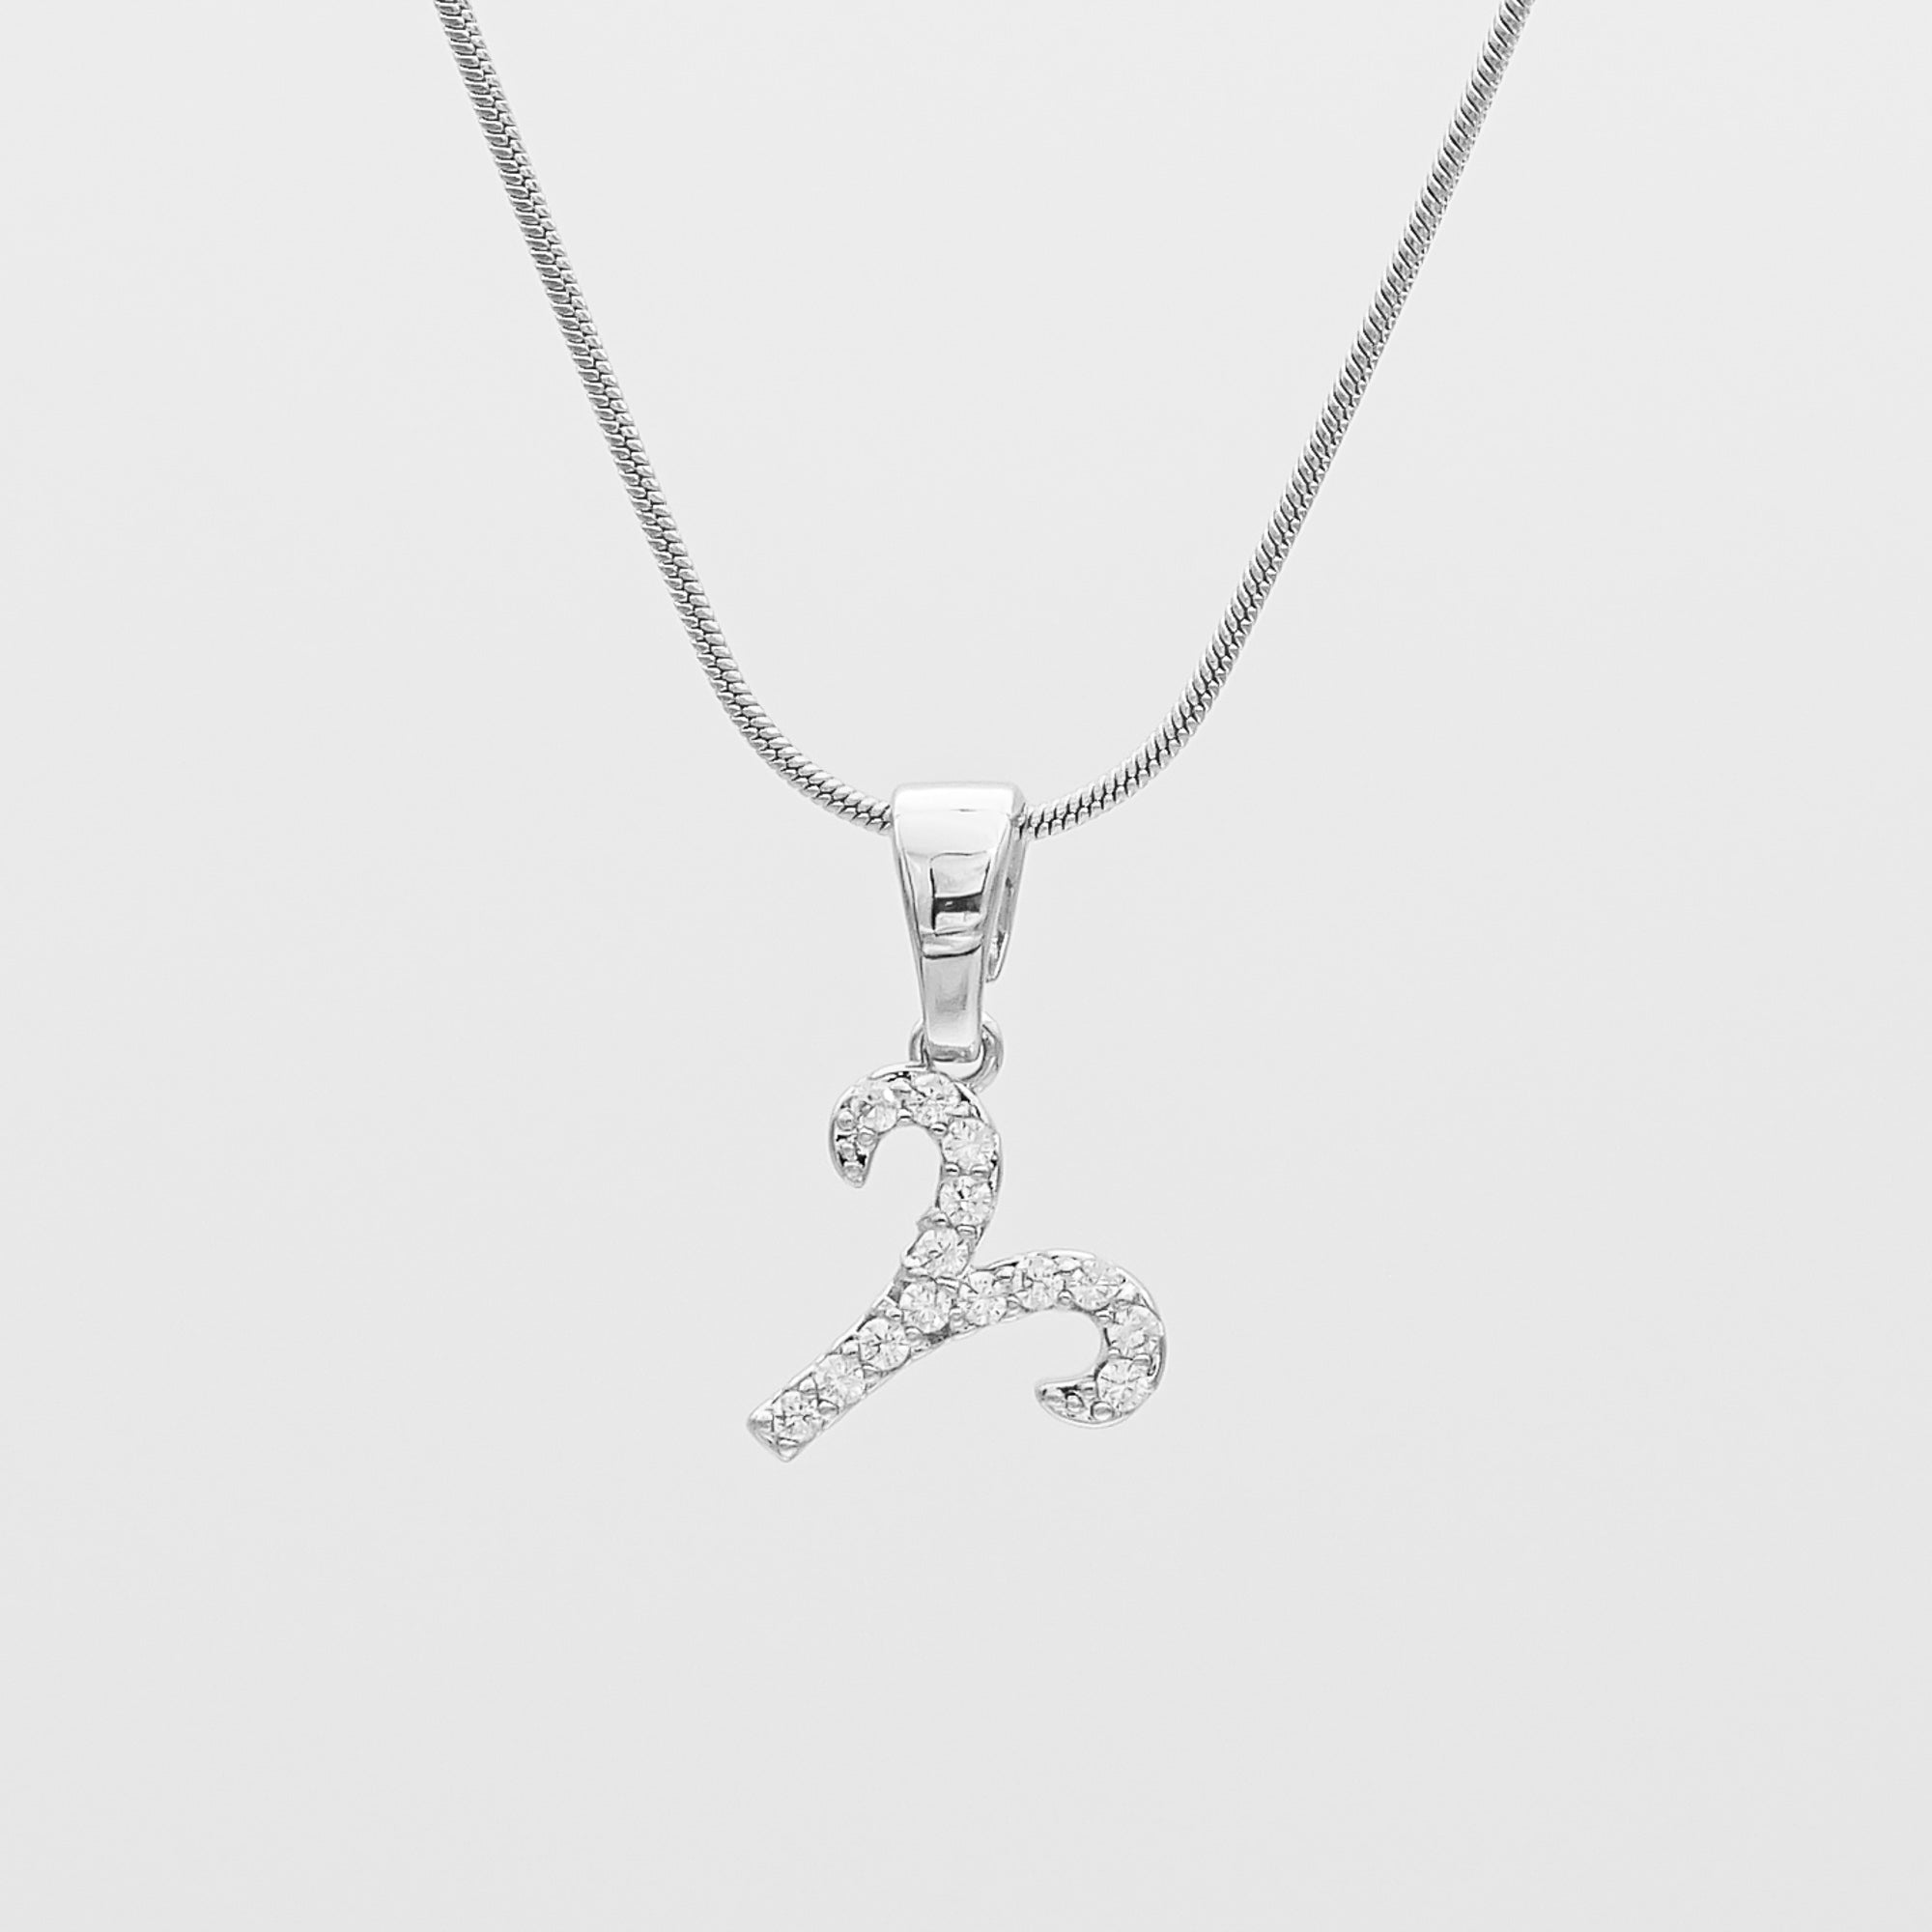 Silver ICY Zodiac Aries Symbol Pendant Necklace by PRYA